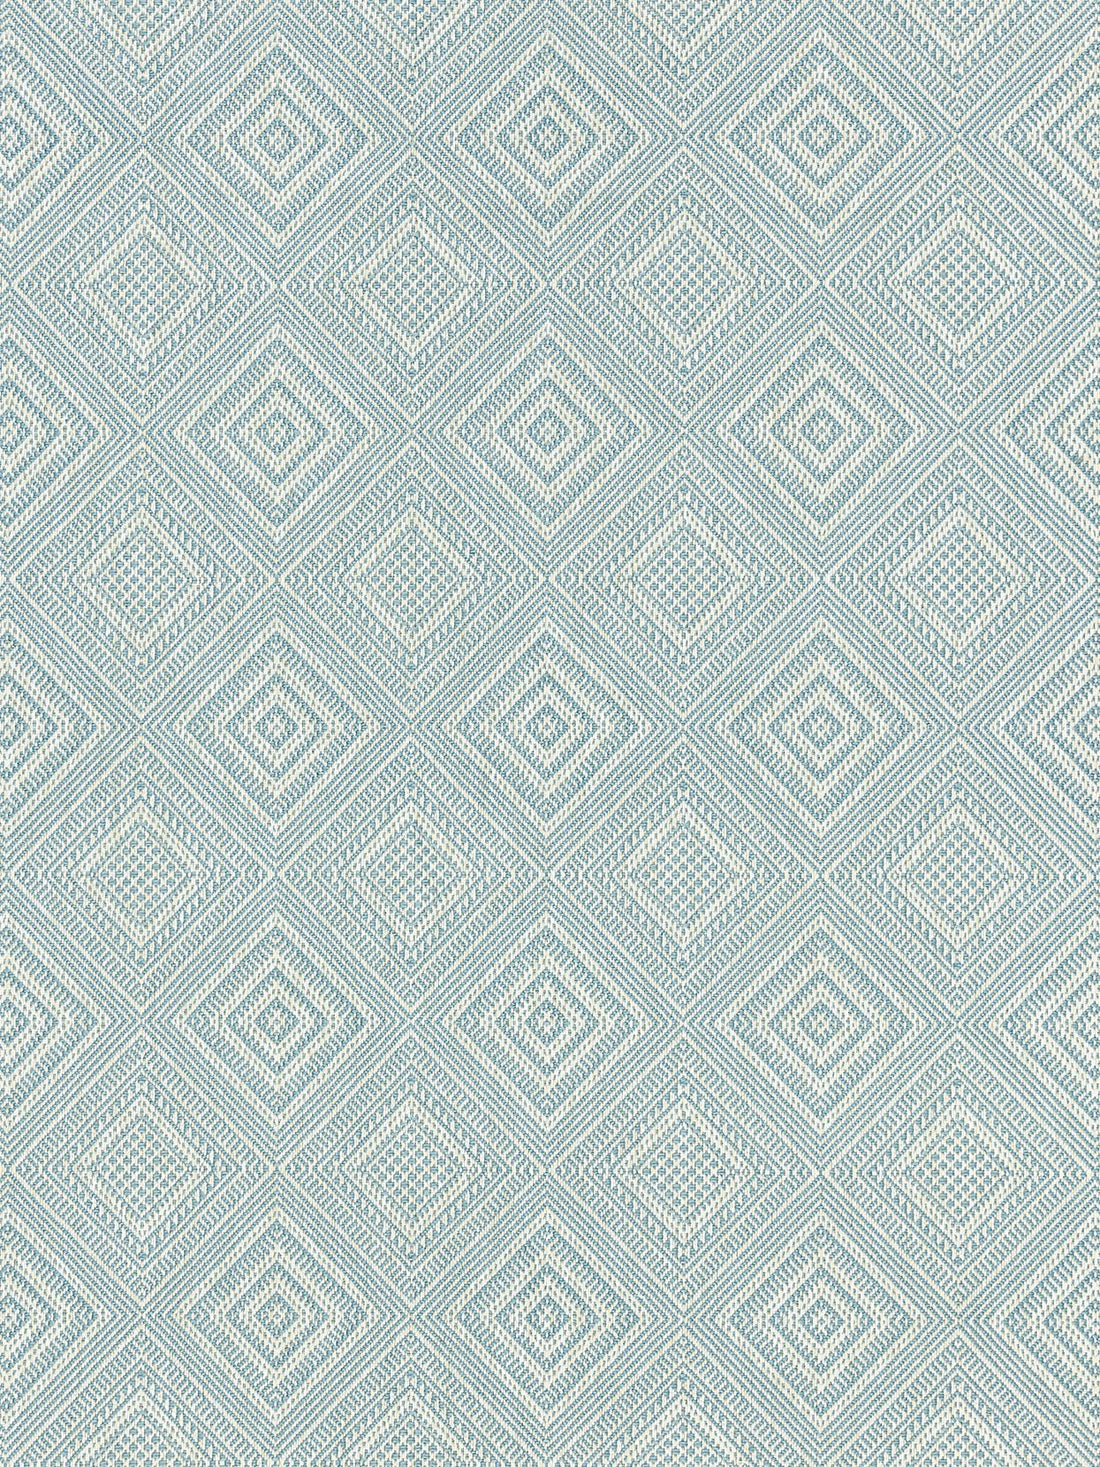 Antigua Weave fabric in sky color - pattern number SC 000327197 - by Scalamandre in the Scalamandre Fabrics Book 1 collection